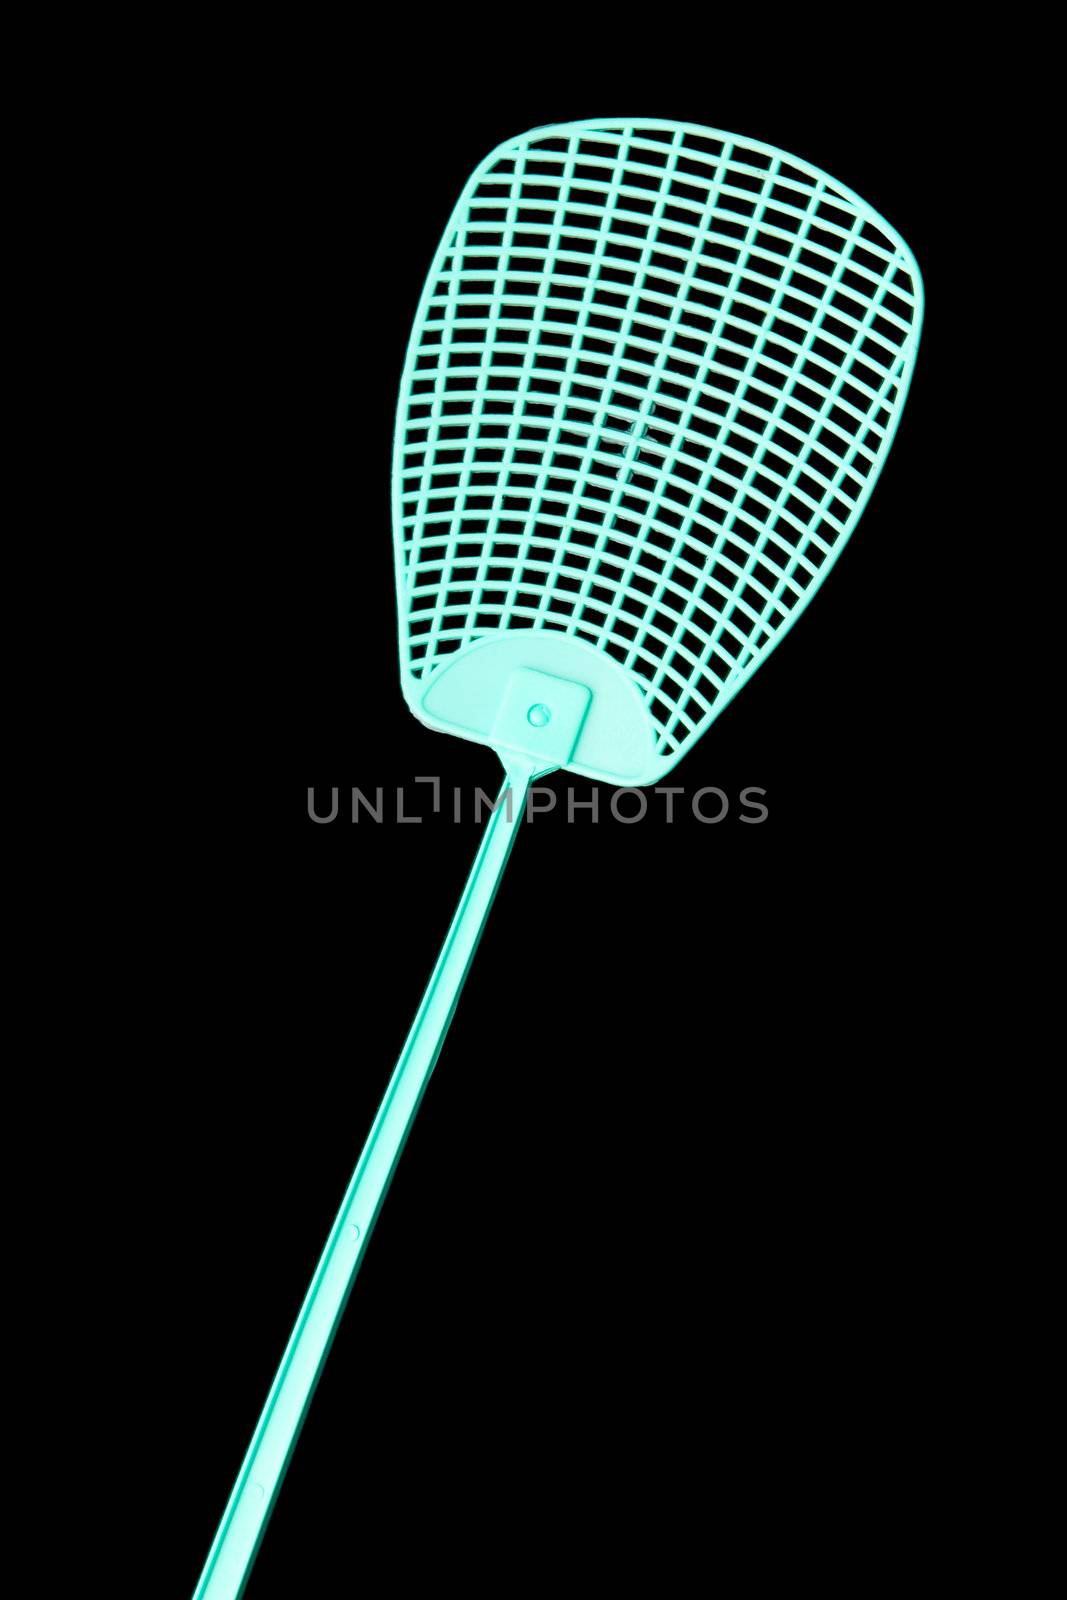 Fly swatter by Yaurinko